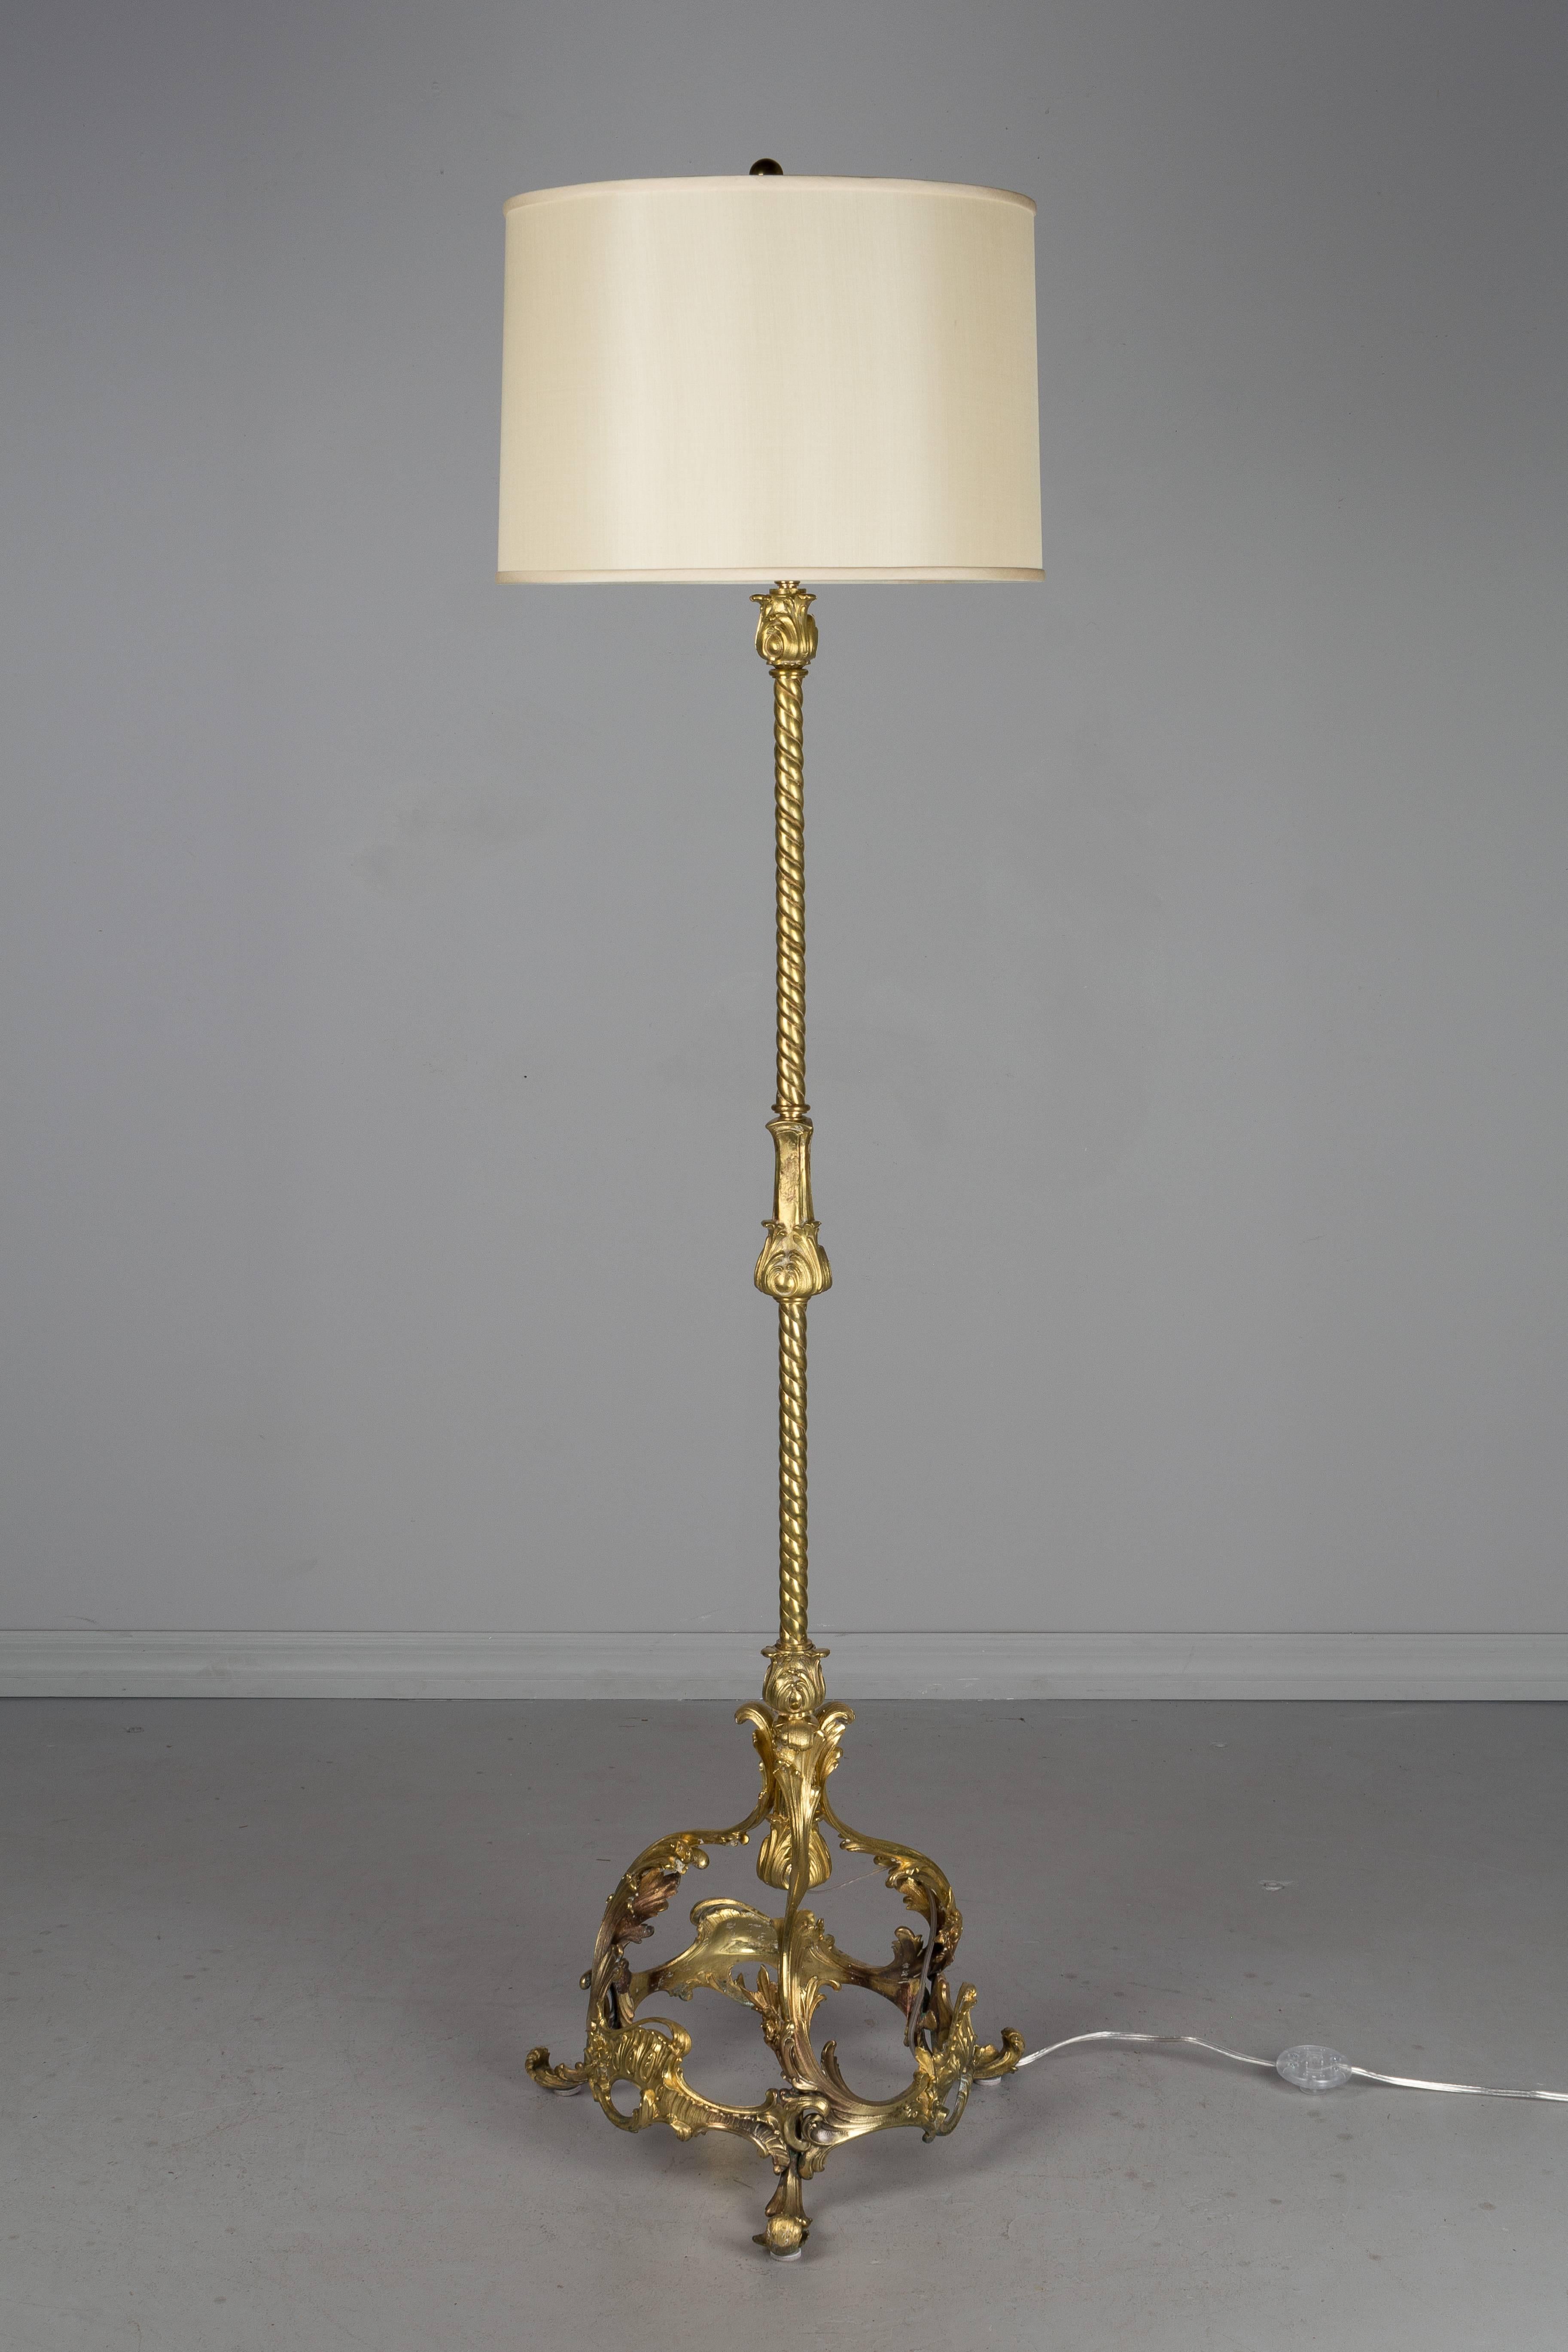 A 19th century French Louis XV style bronze and brass floor lamp. Finely cast fire gilded bronze with heavy welded base. Pole of brass roped tubing with solid cast bronze foliate decorative elements. Rewired with new socket and floor switch. Silk